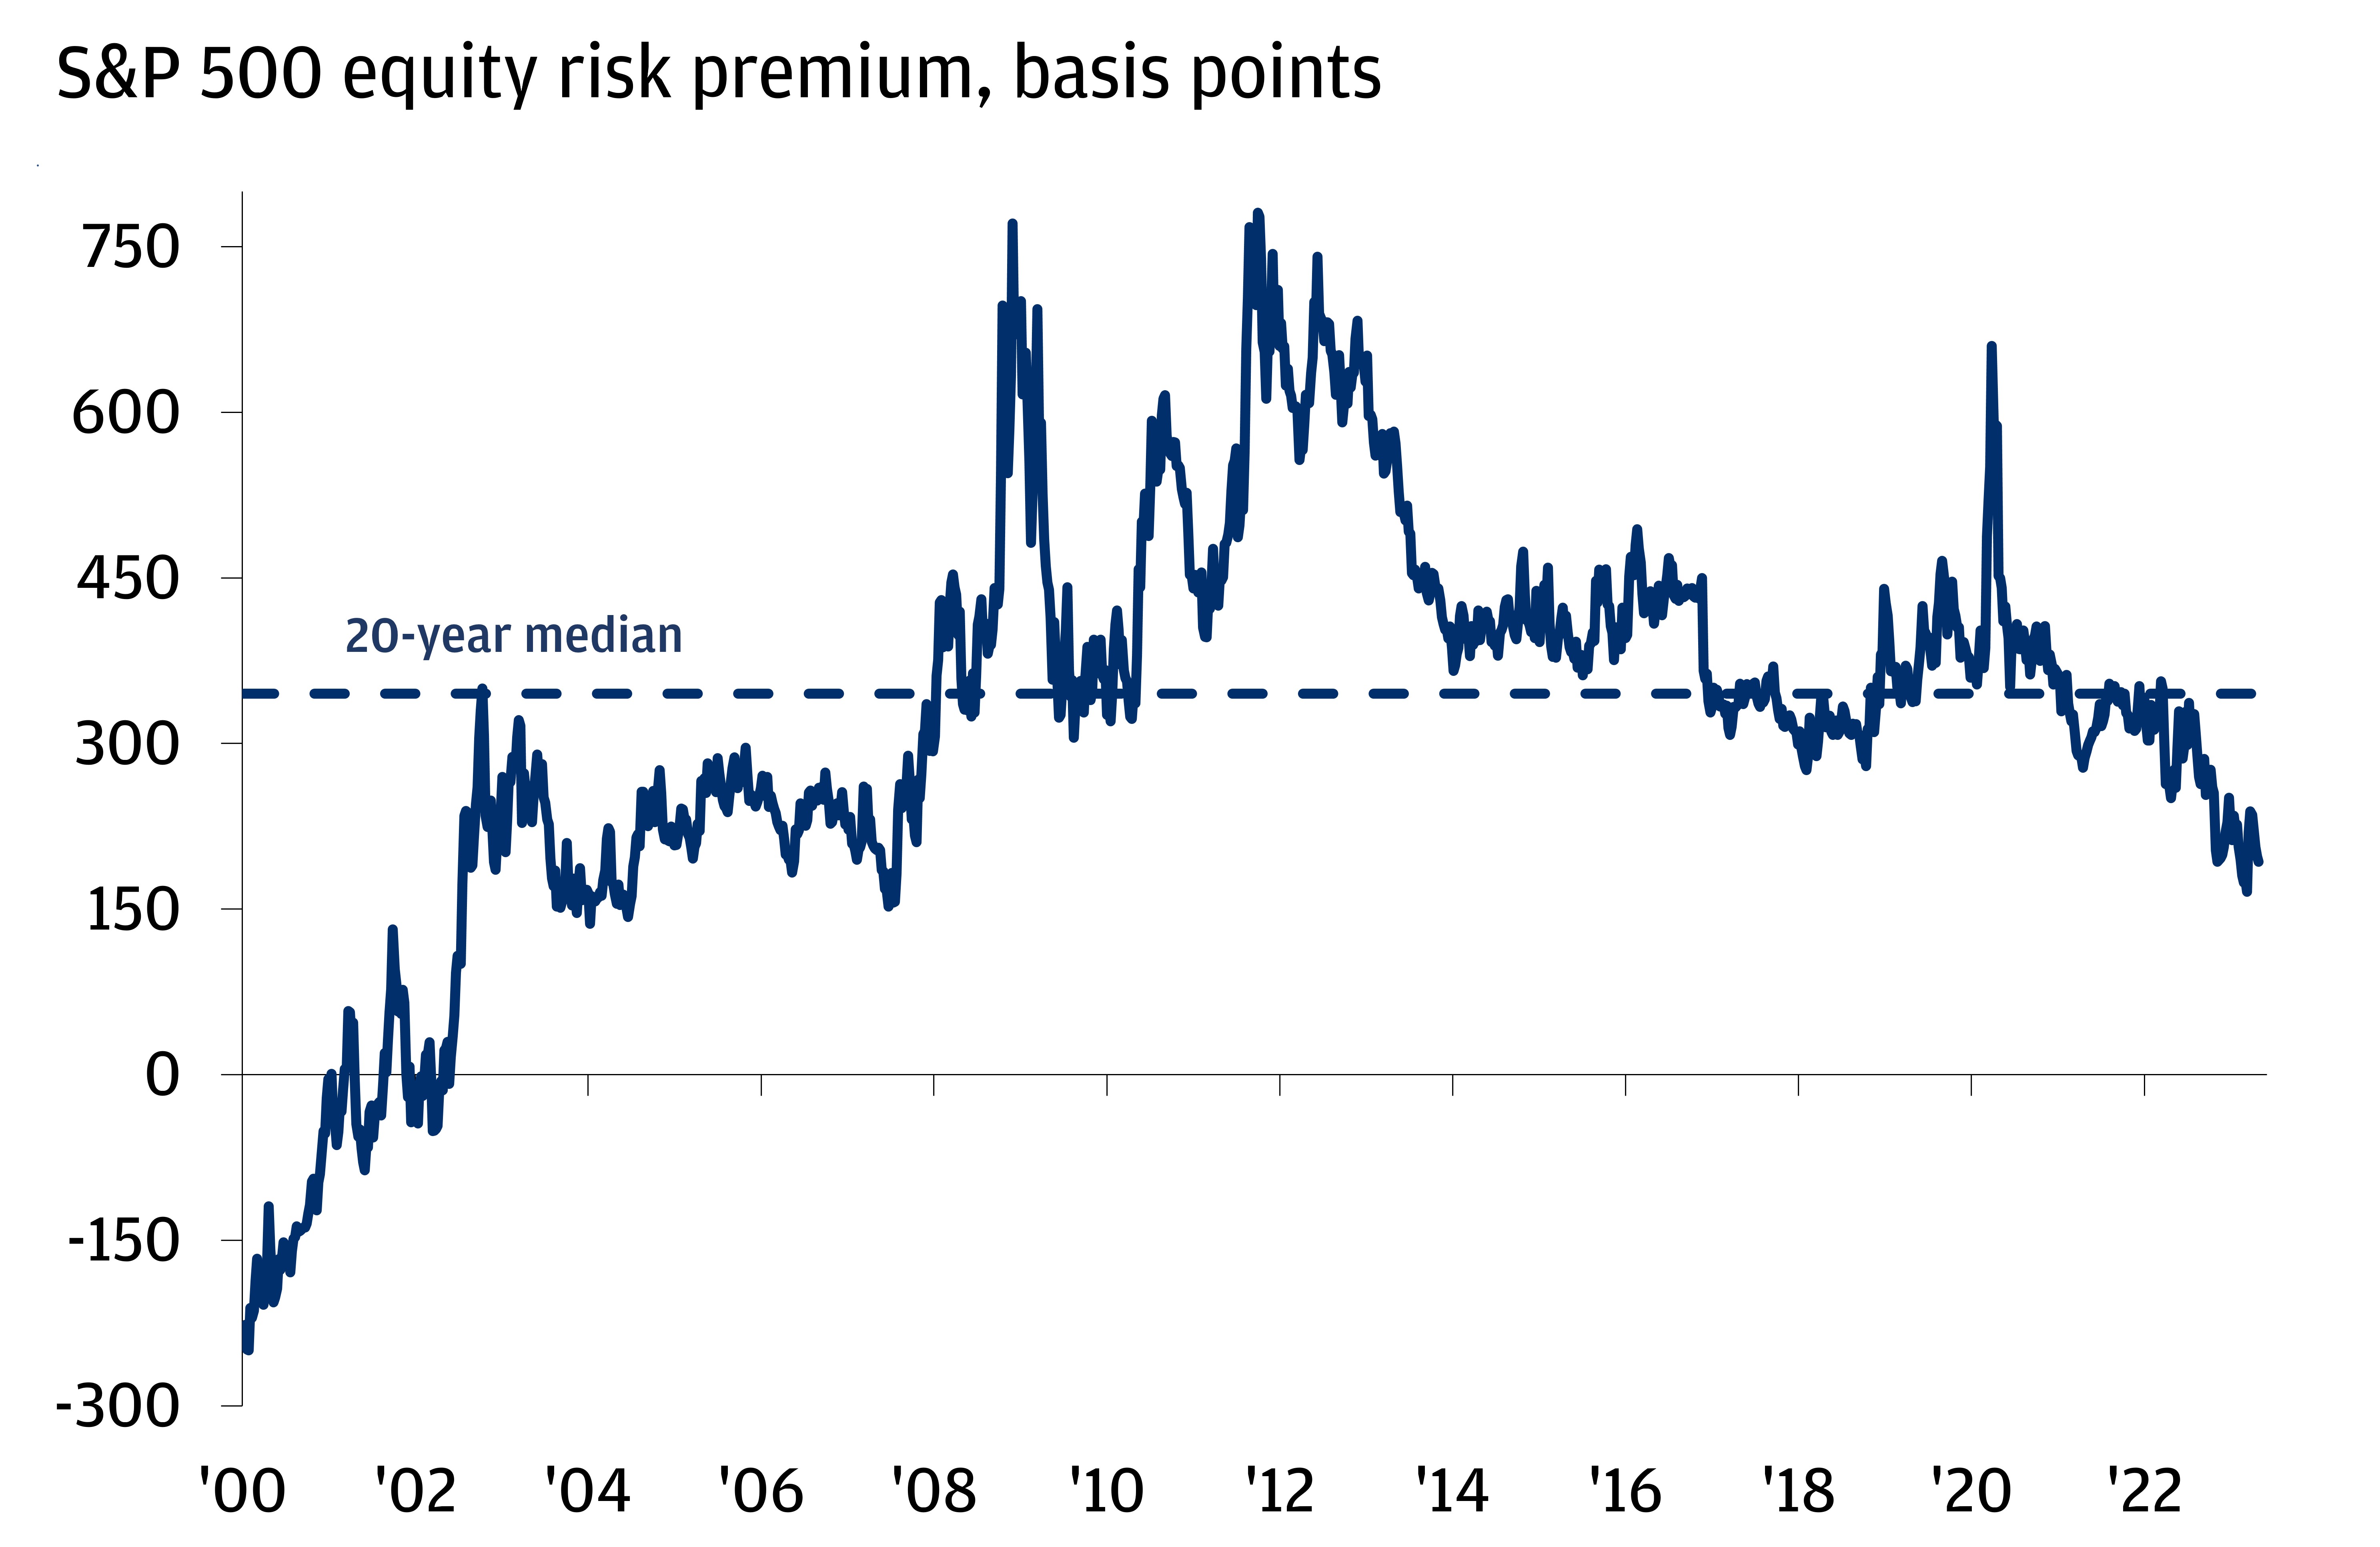 This chart shows the S&P 500 equity risk premium (in basis points)—which is the S&P 500 earnings yield (next 12 months earnings/price) by the 10-year Treasury yield—from 2000 to 2023.